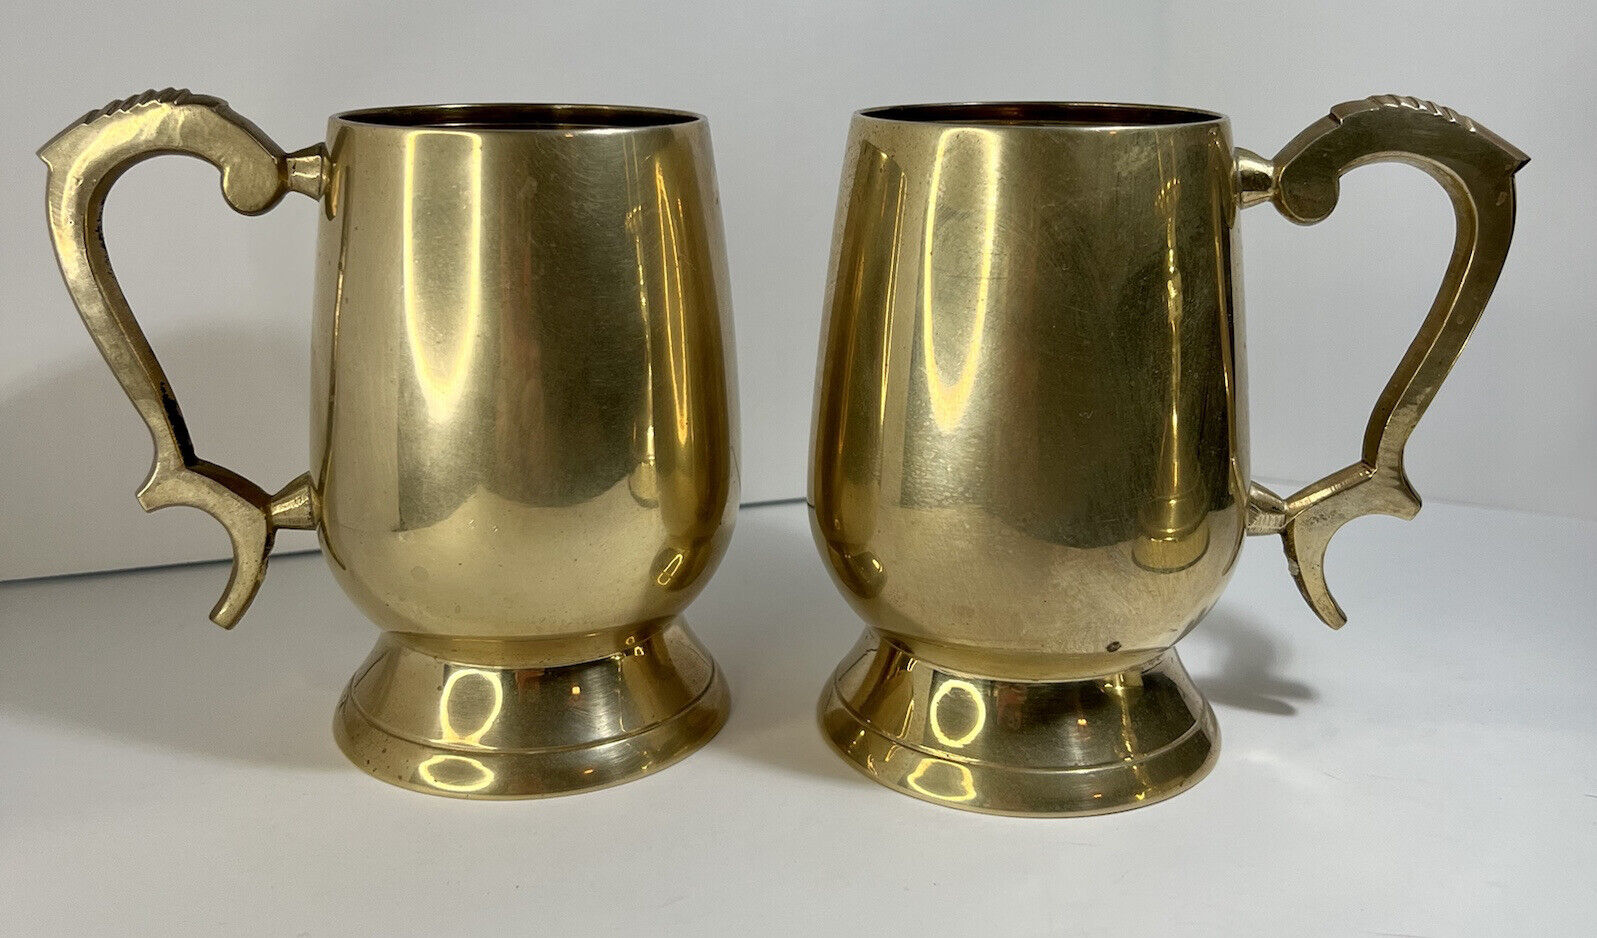 Pair (2) Vintage Large Brass Beer Mugs Ornate Handles 5” Tall Holds 16 ozs India